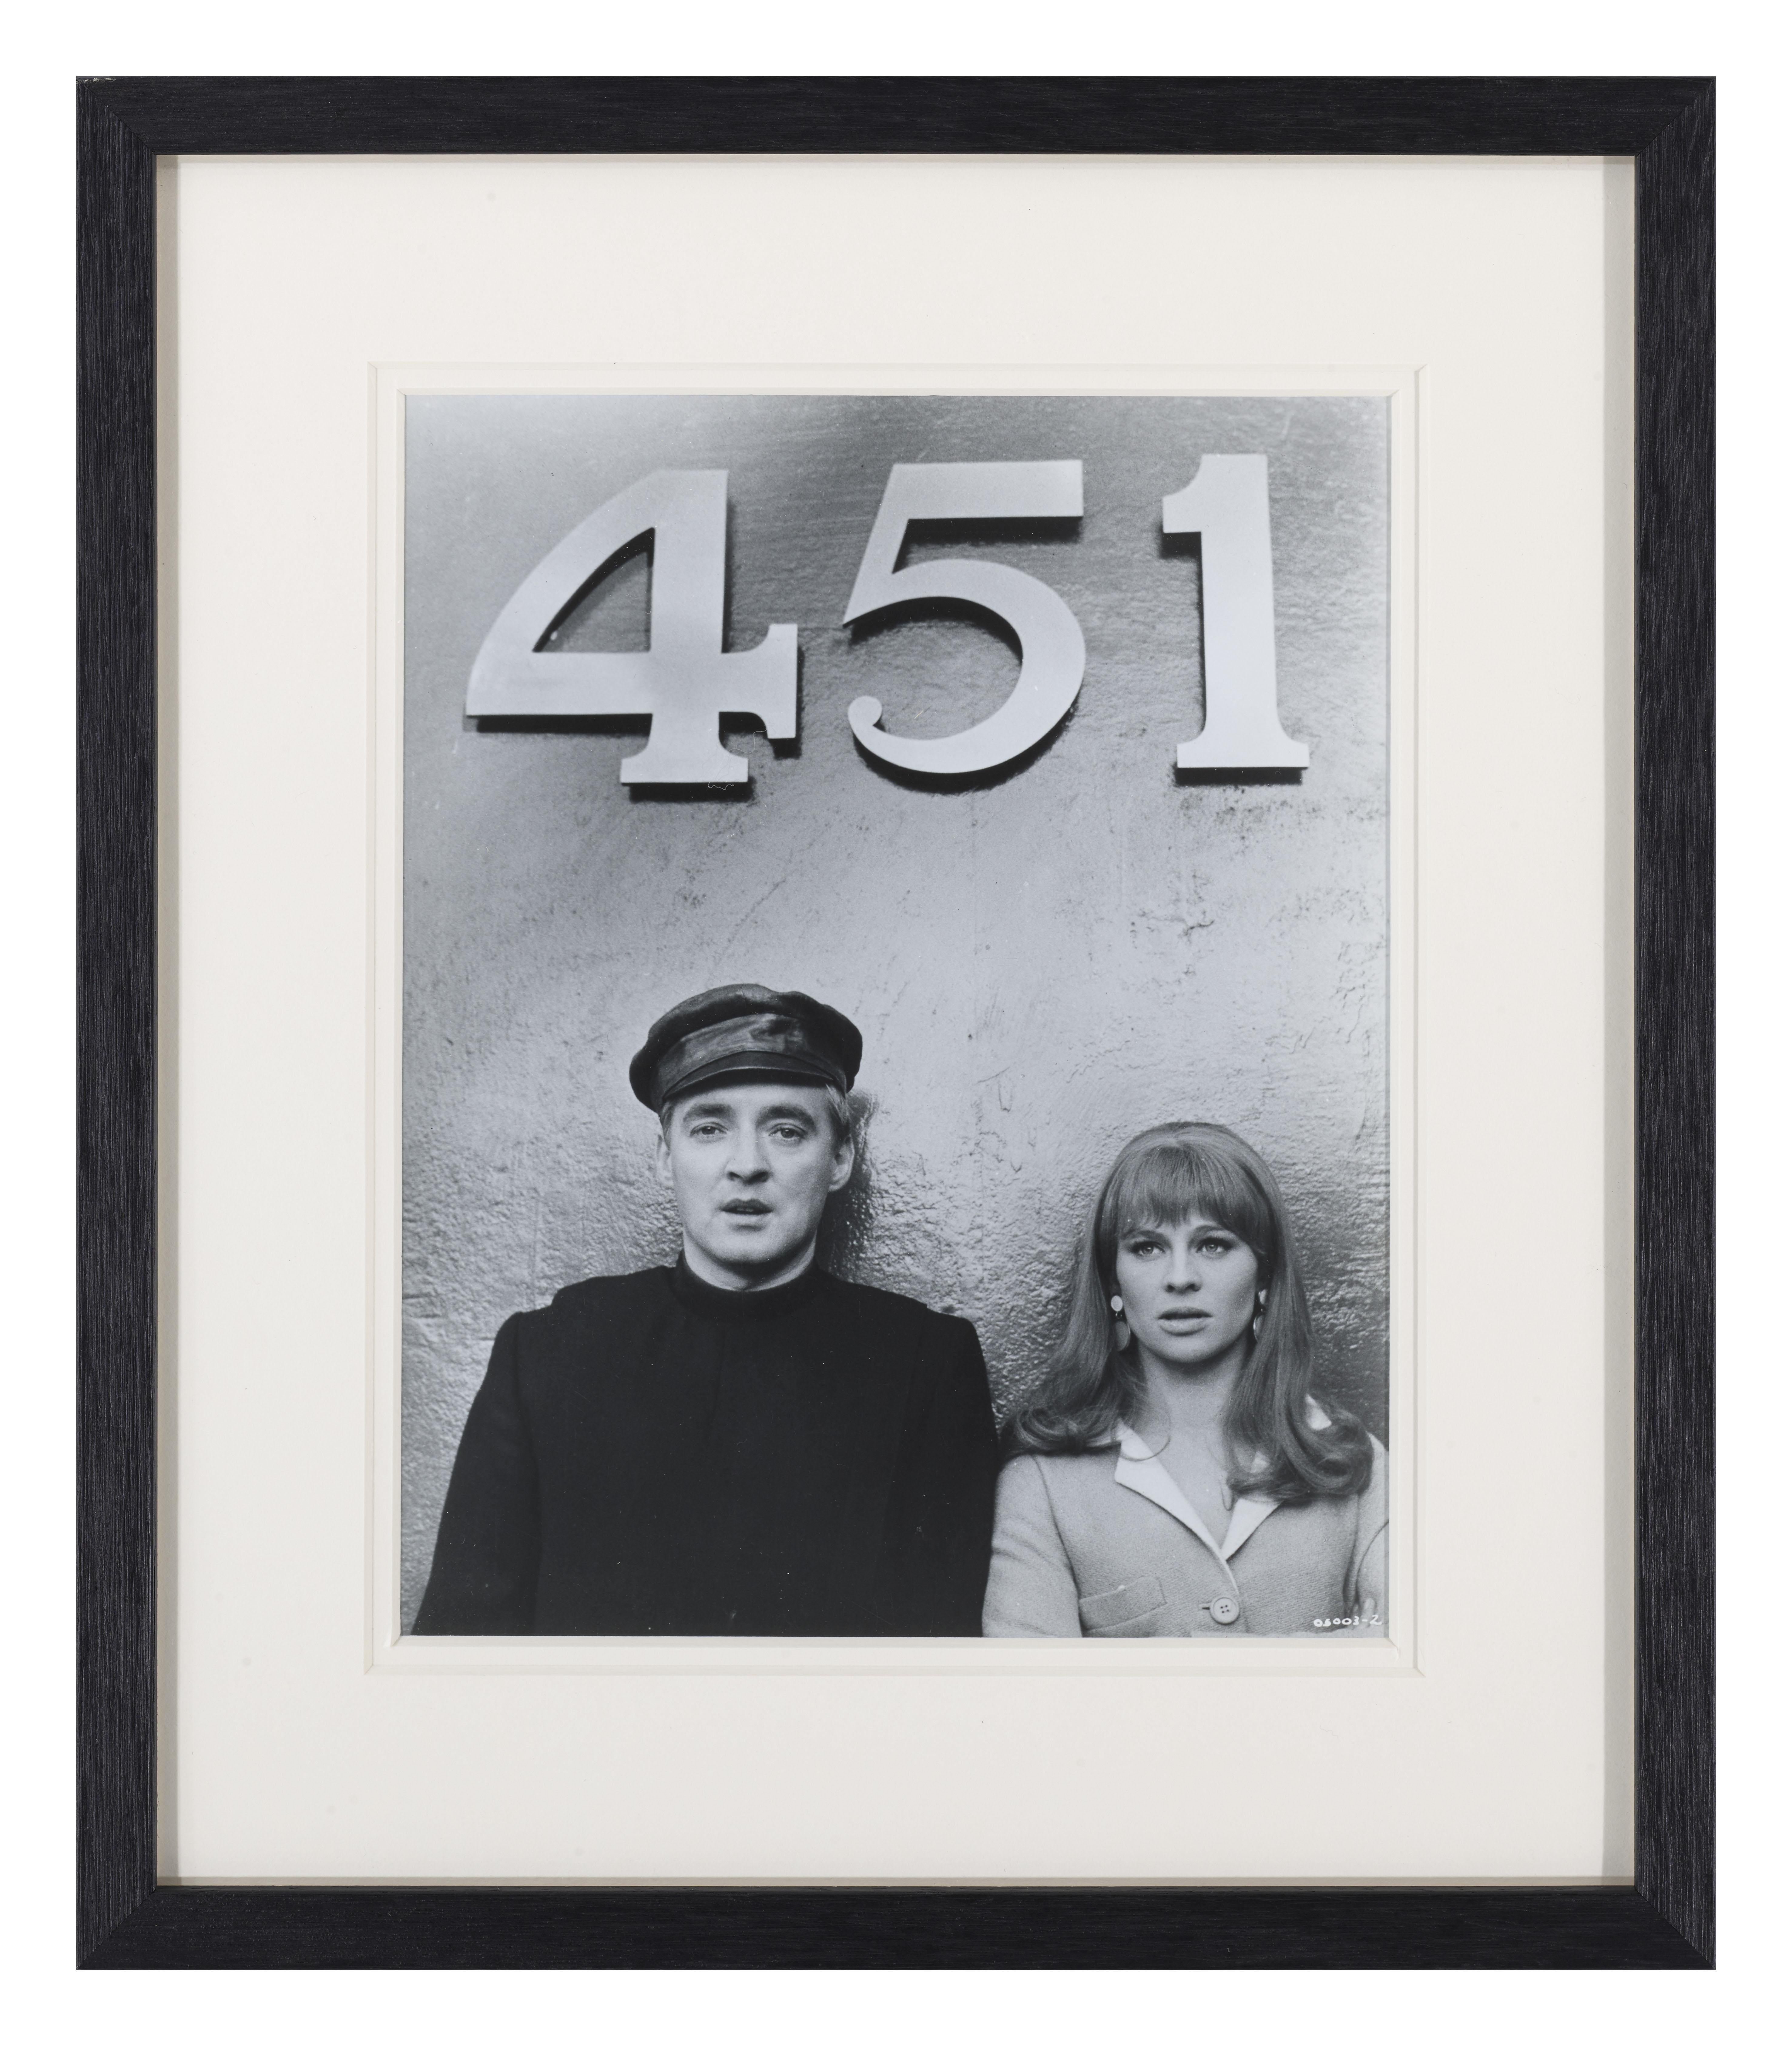 Original US photographic studio production for the 1966 French New Wave film.
staring Oskar Werner, Julie Christie and Cyril Cusack Celia. This film was directed by Francois Truffaut.
This piece is framed in a Sapele wood frame with acid free card